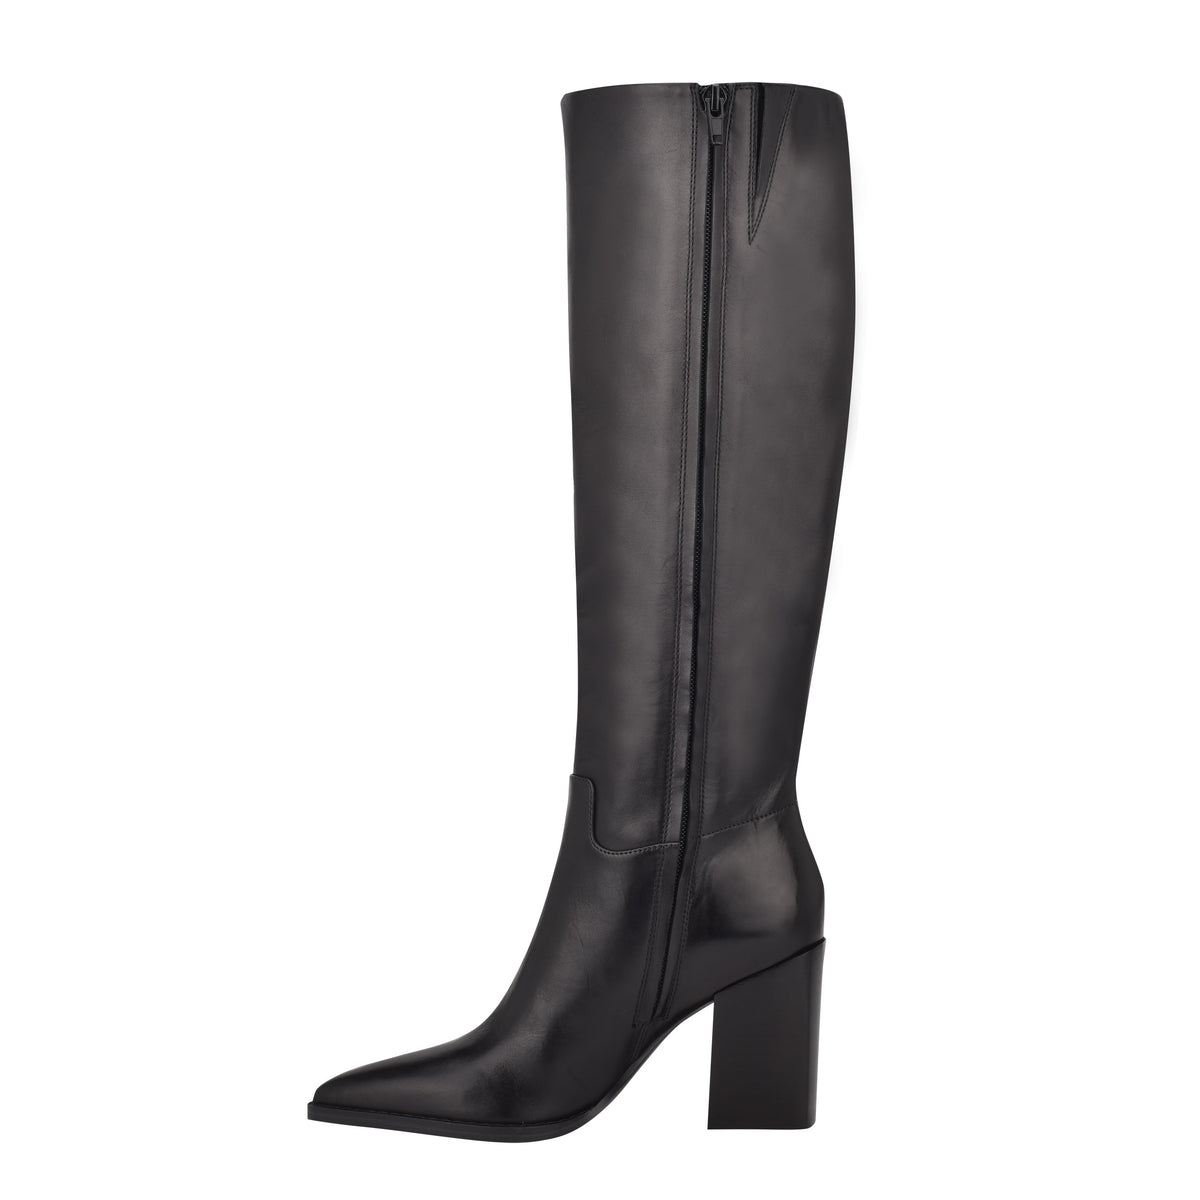 Brixe Heeled Boots